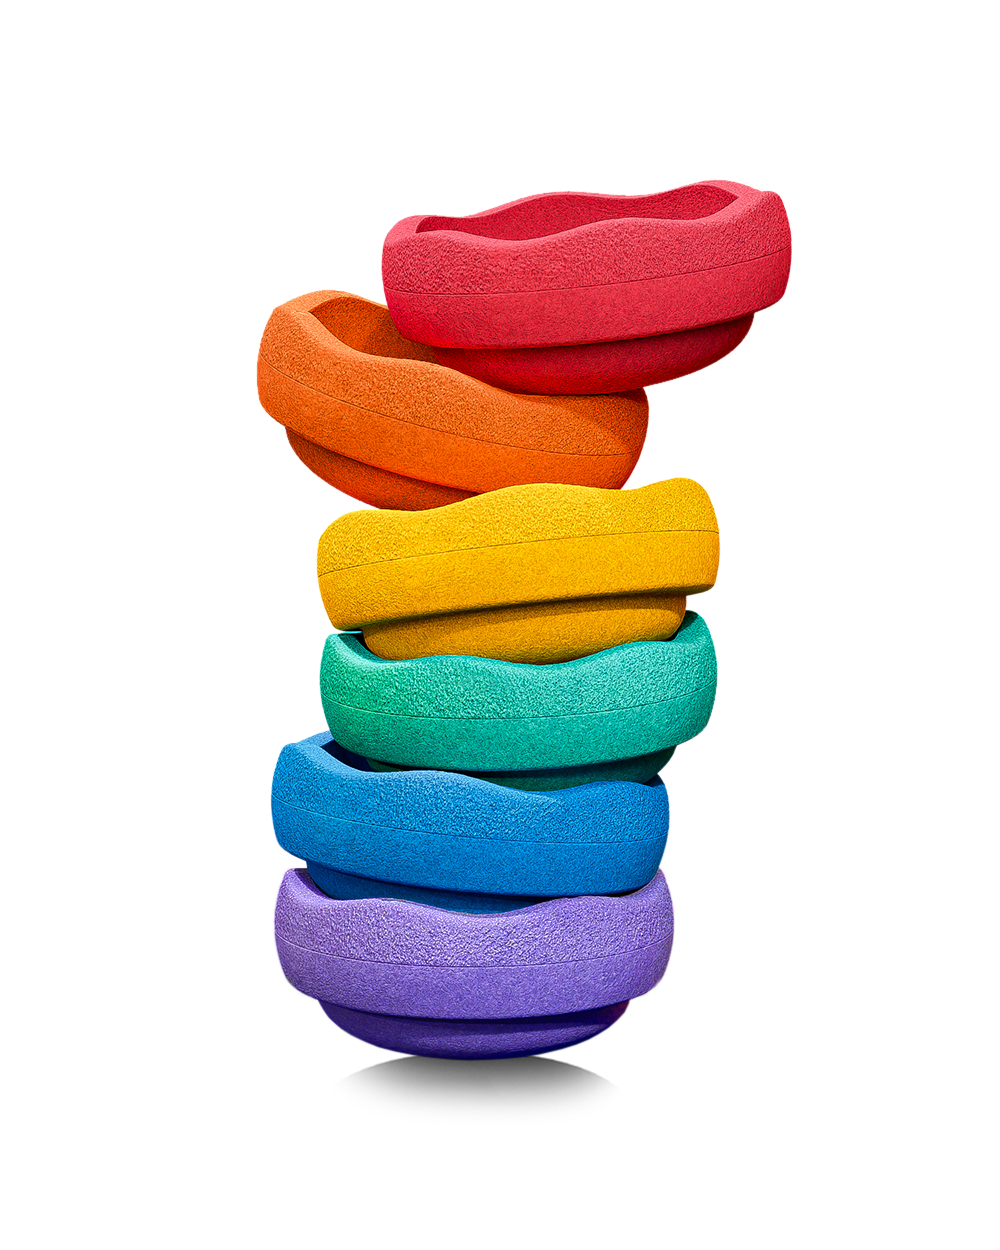 A Stapelstein Classic Rainbow Stacking Stone Set of 6 | Children of the Wild